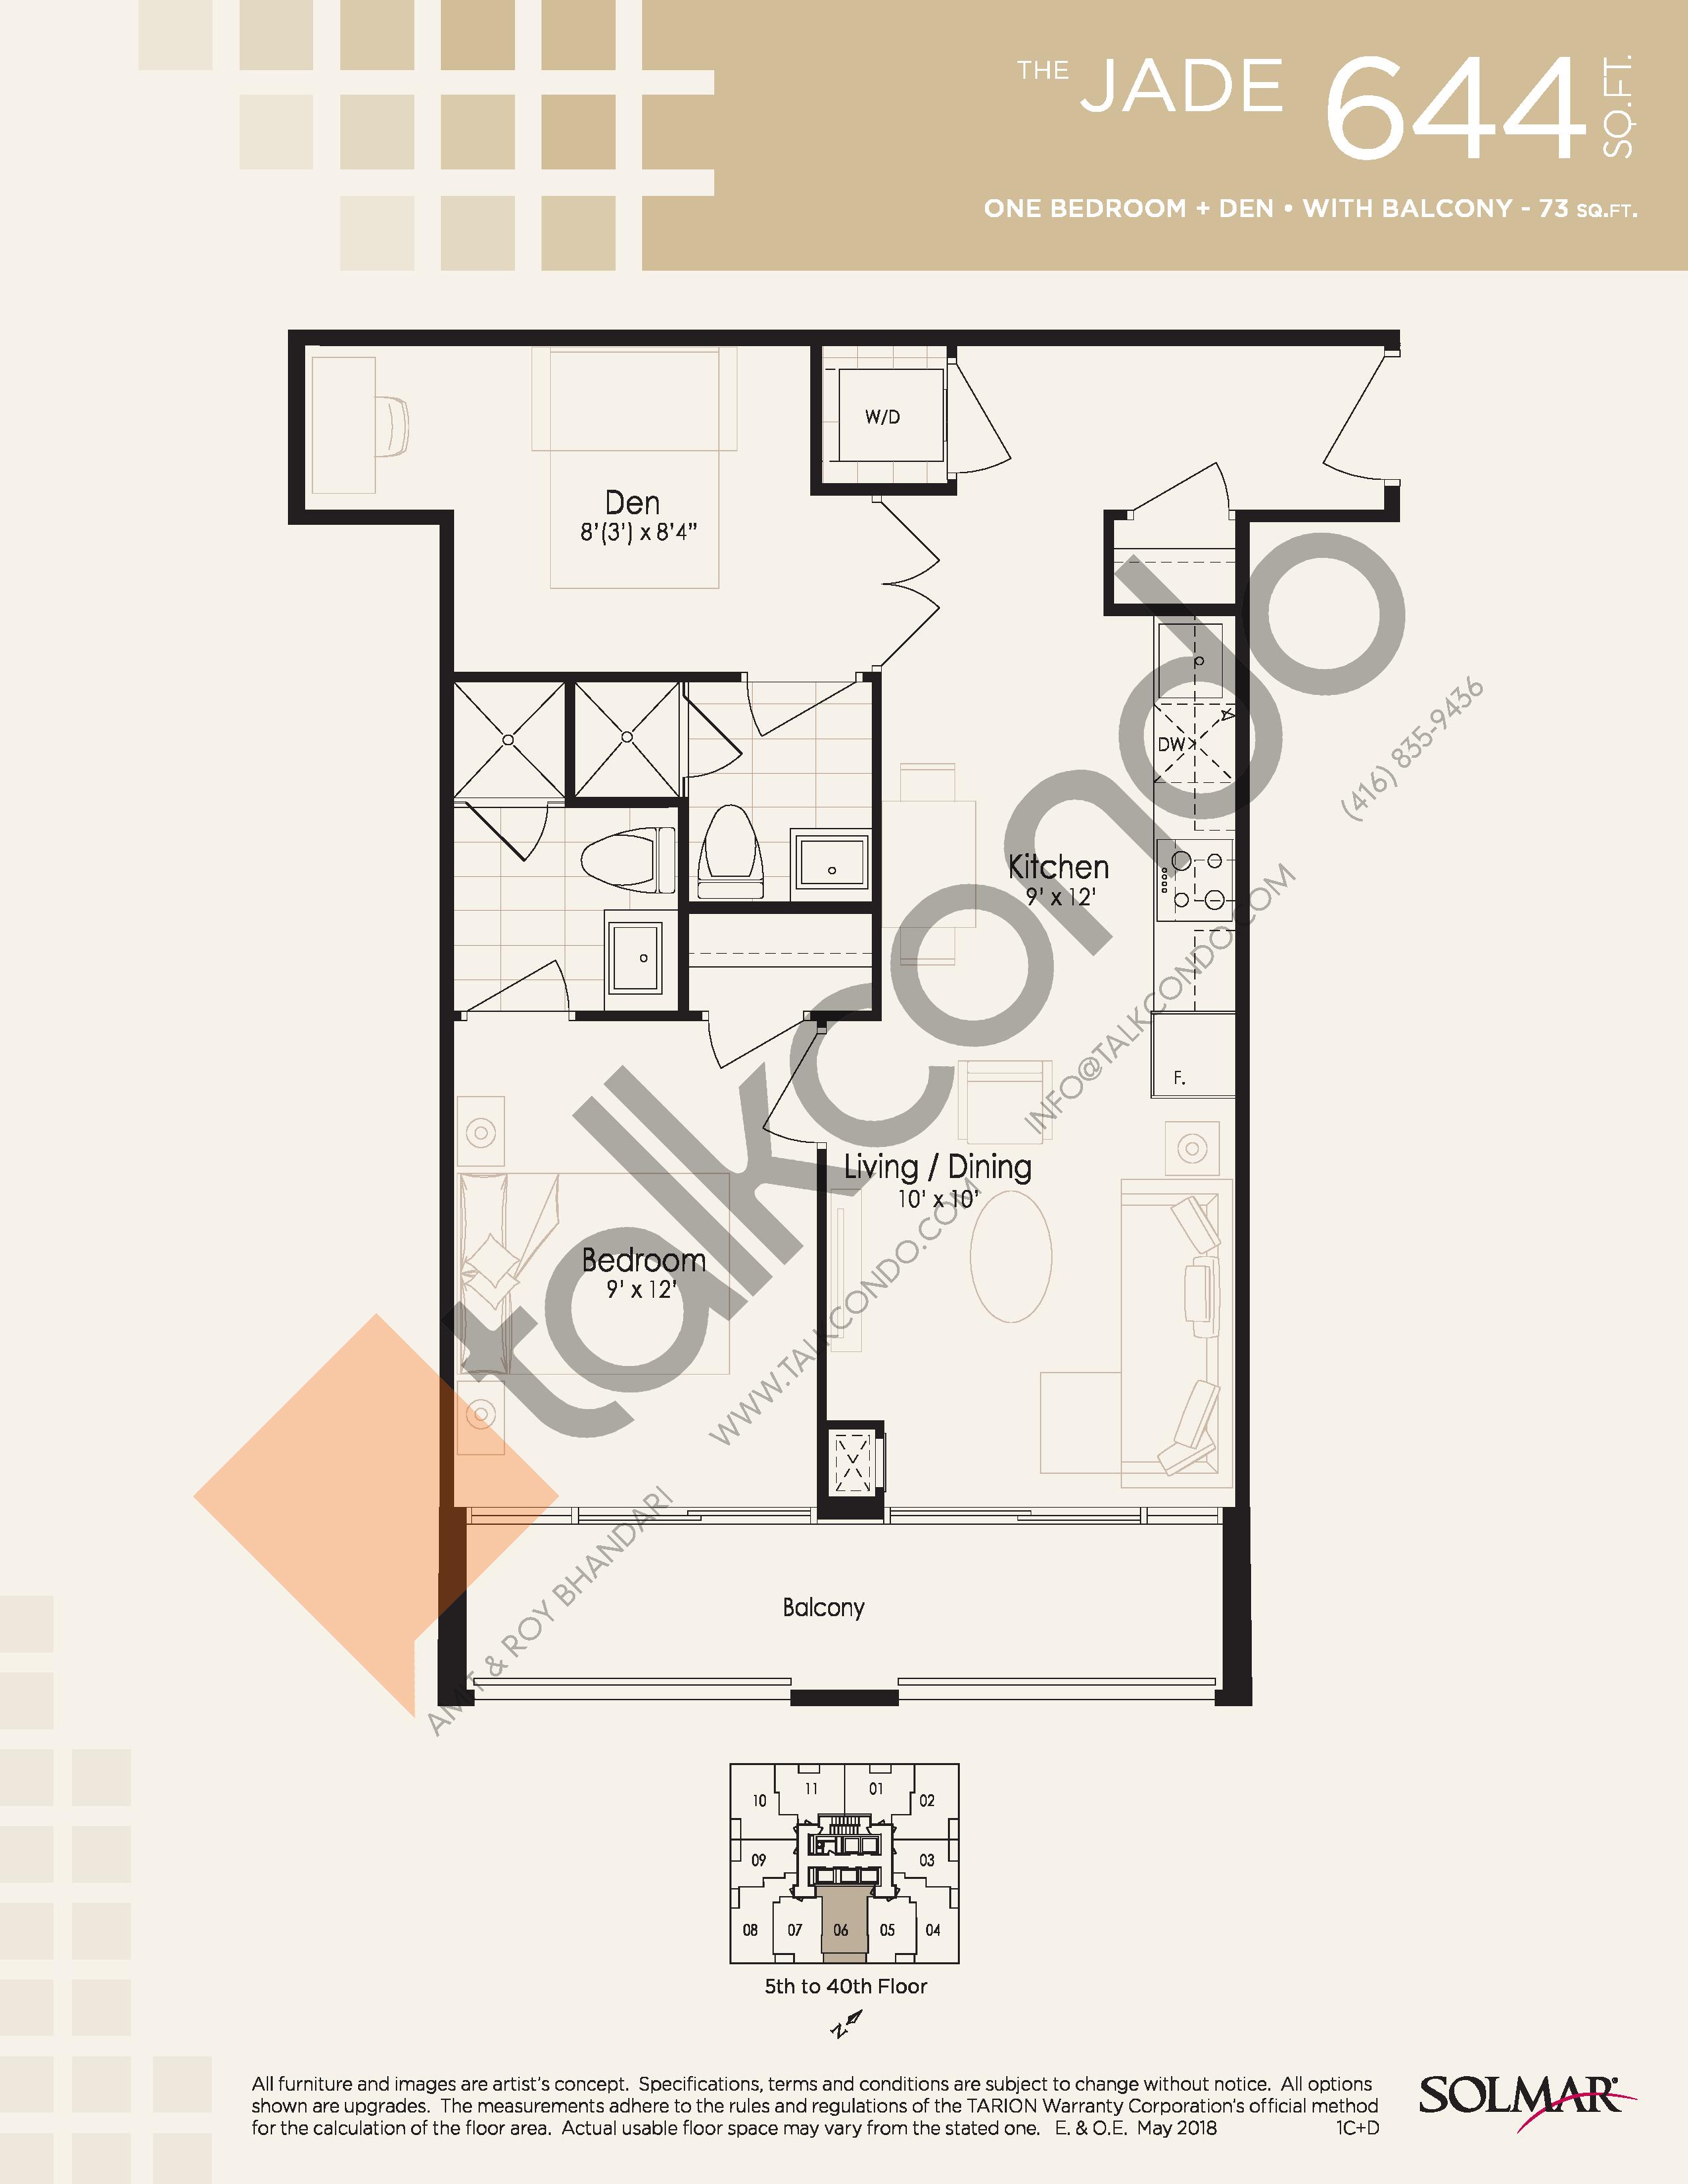 Edge Tower 2 Condos Floor Plans, Prices, Availability